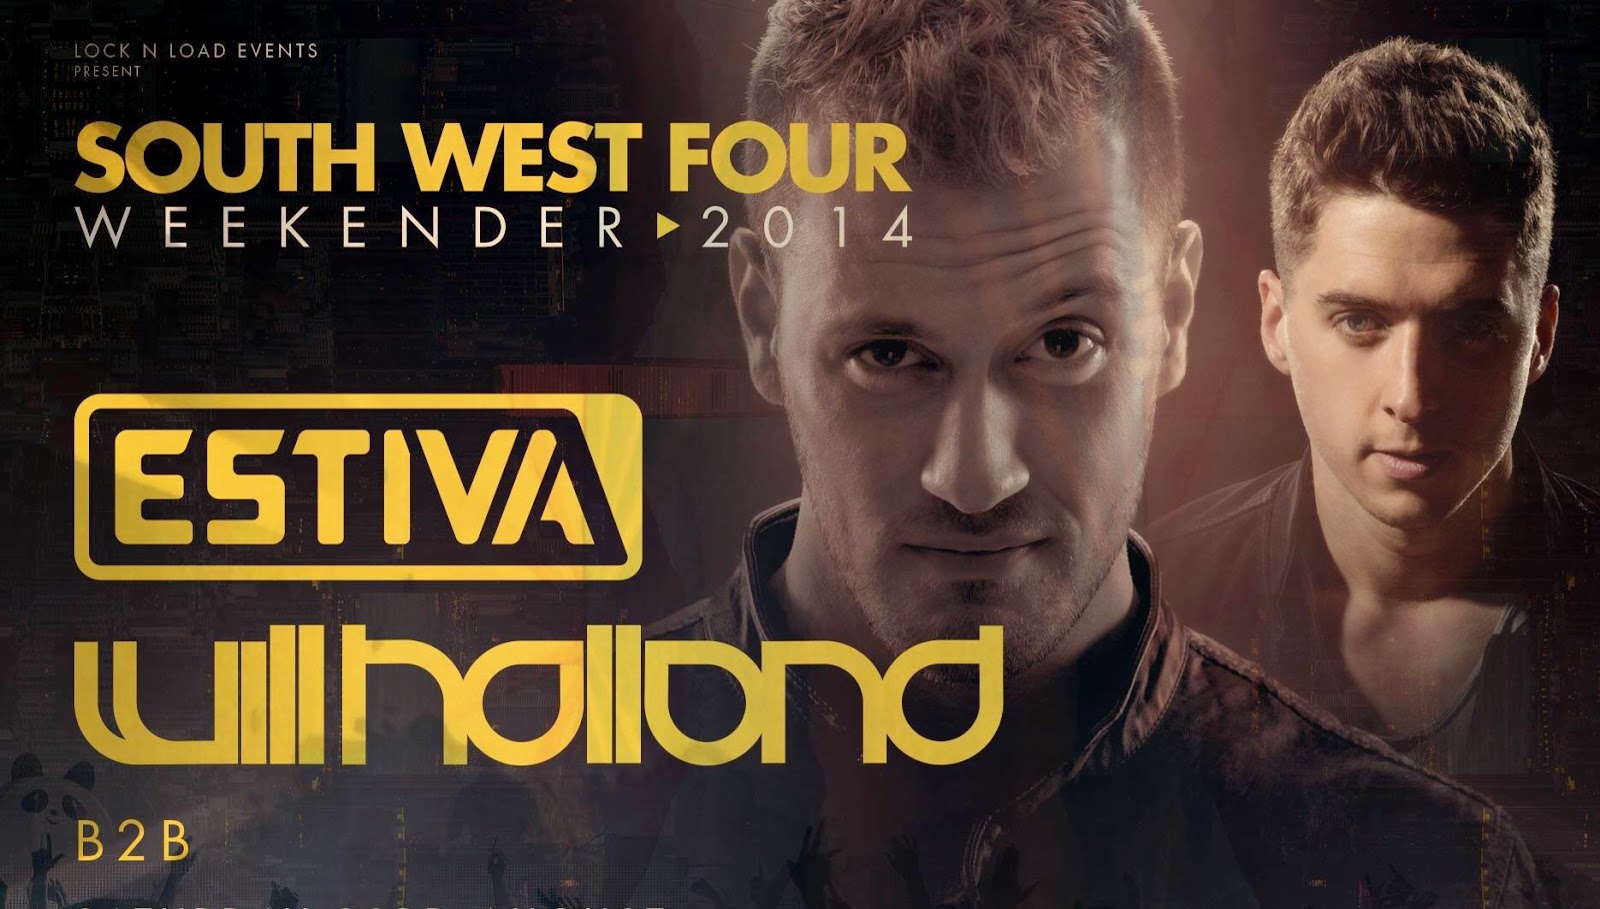 estiva b2b will holland at south west four 